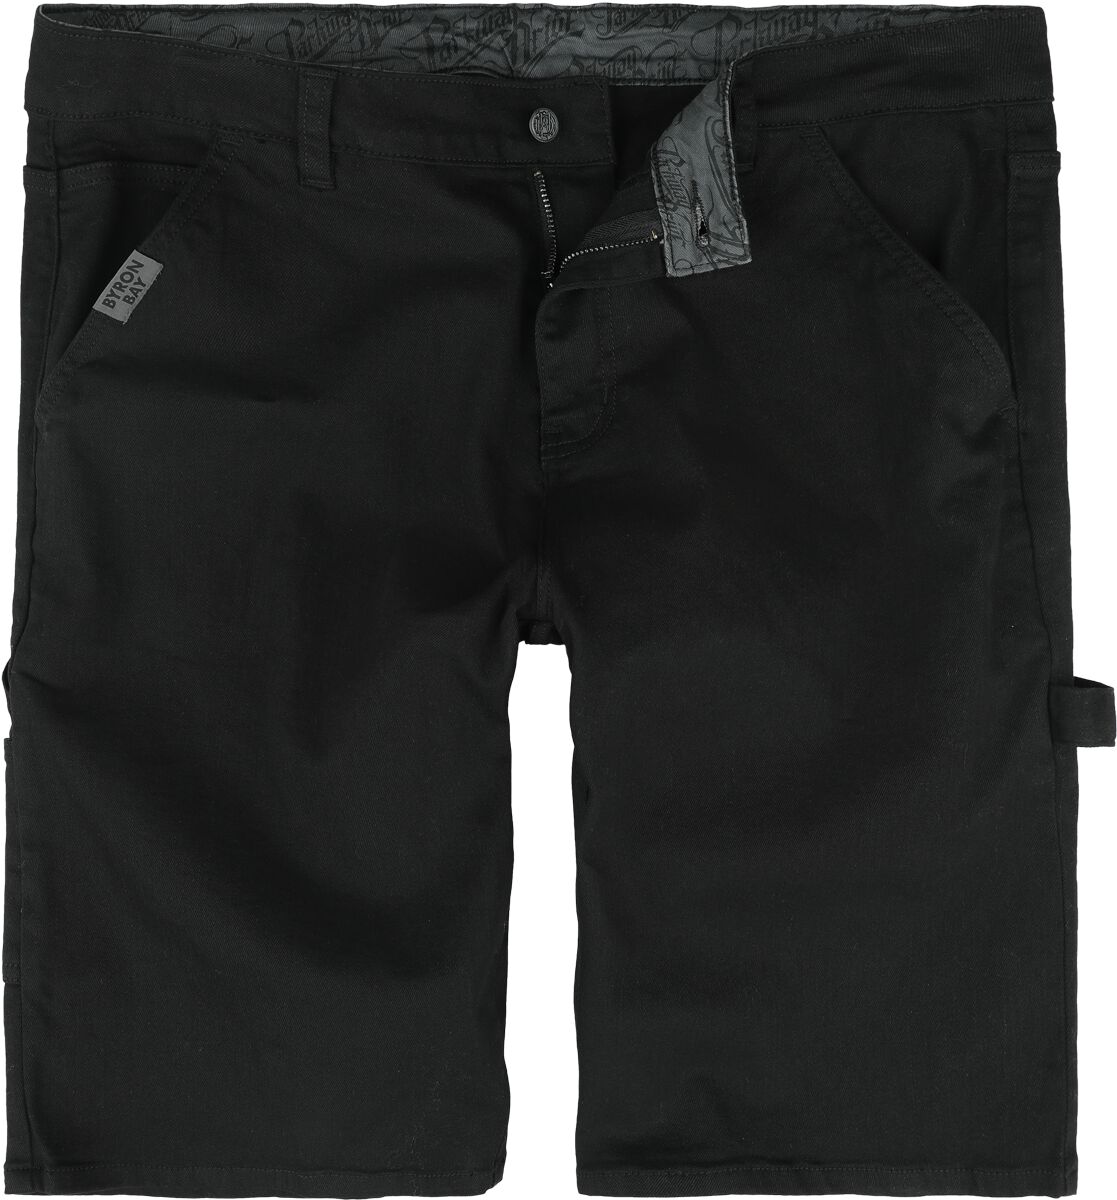 Image of Shorts di Parkway Drive - EMP Signature Collection - 30 a 36 - Uomo - nero